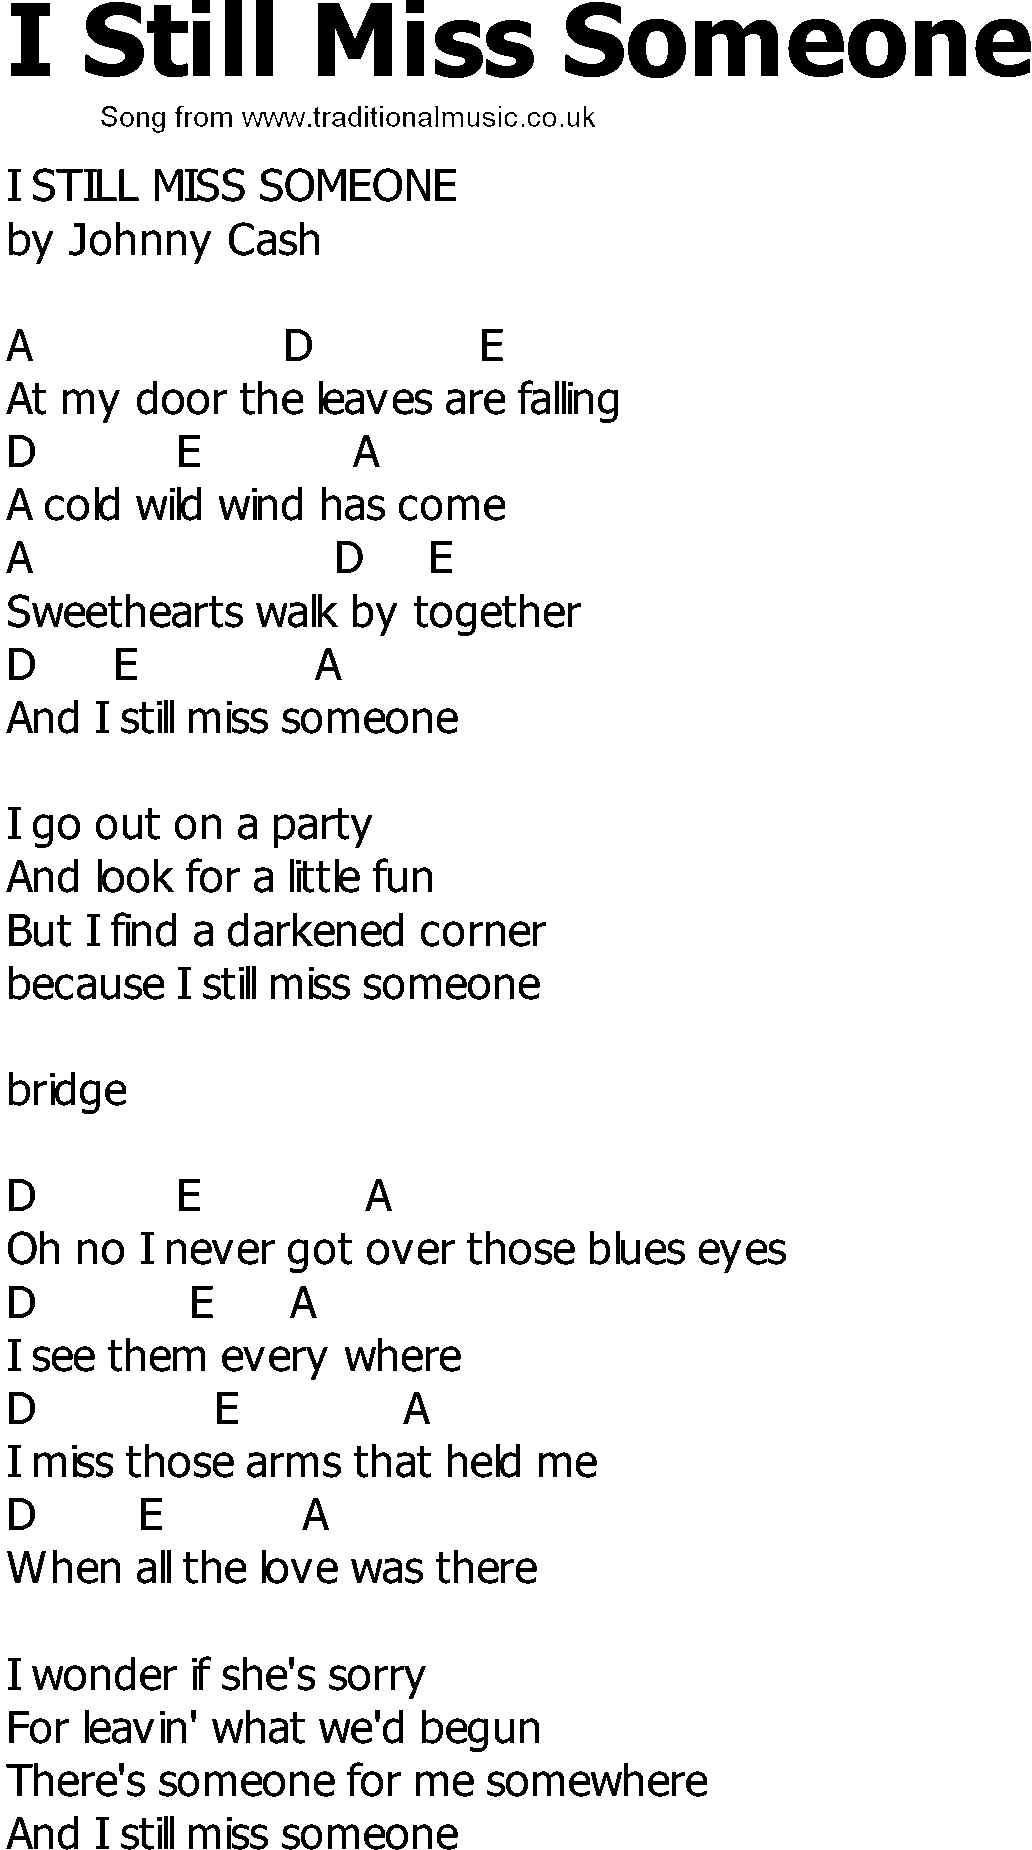 Old Country song lyrics with chords - I Still Miss Someone